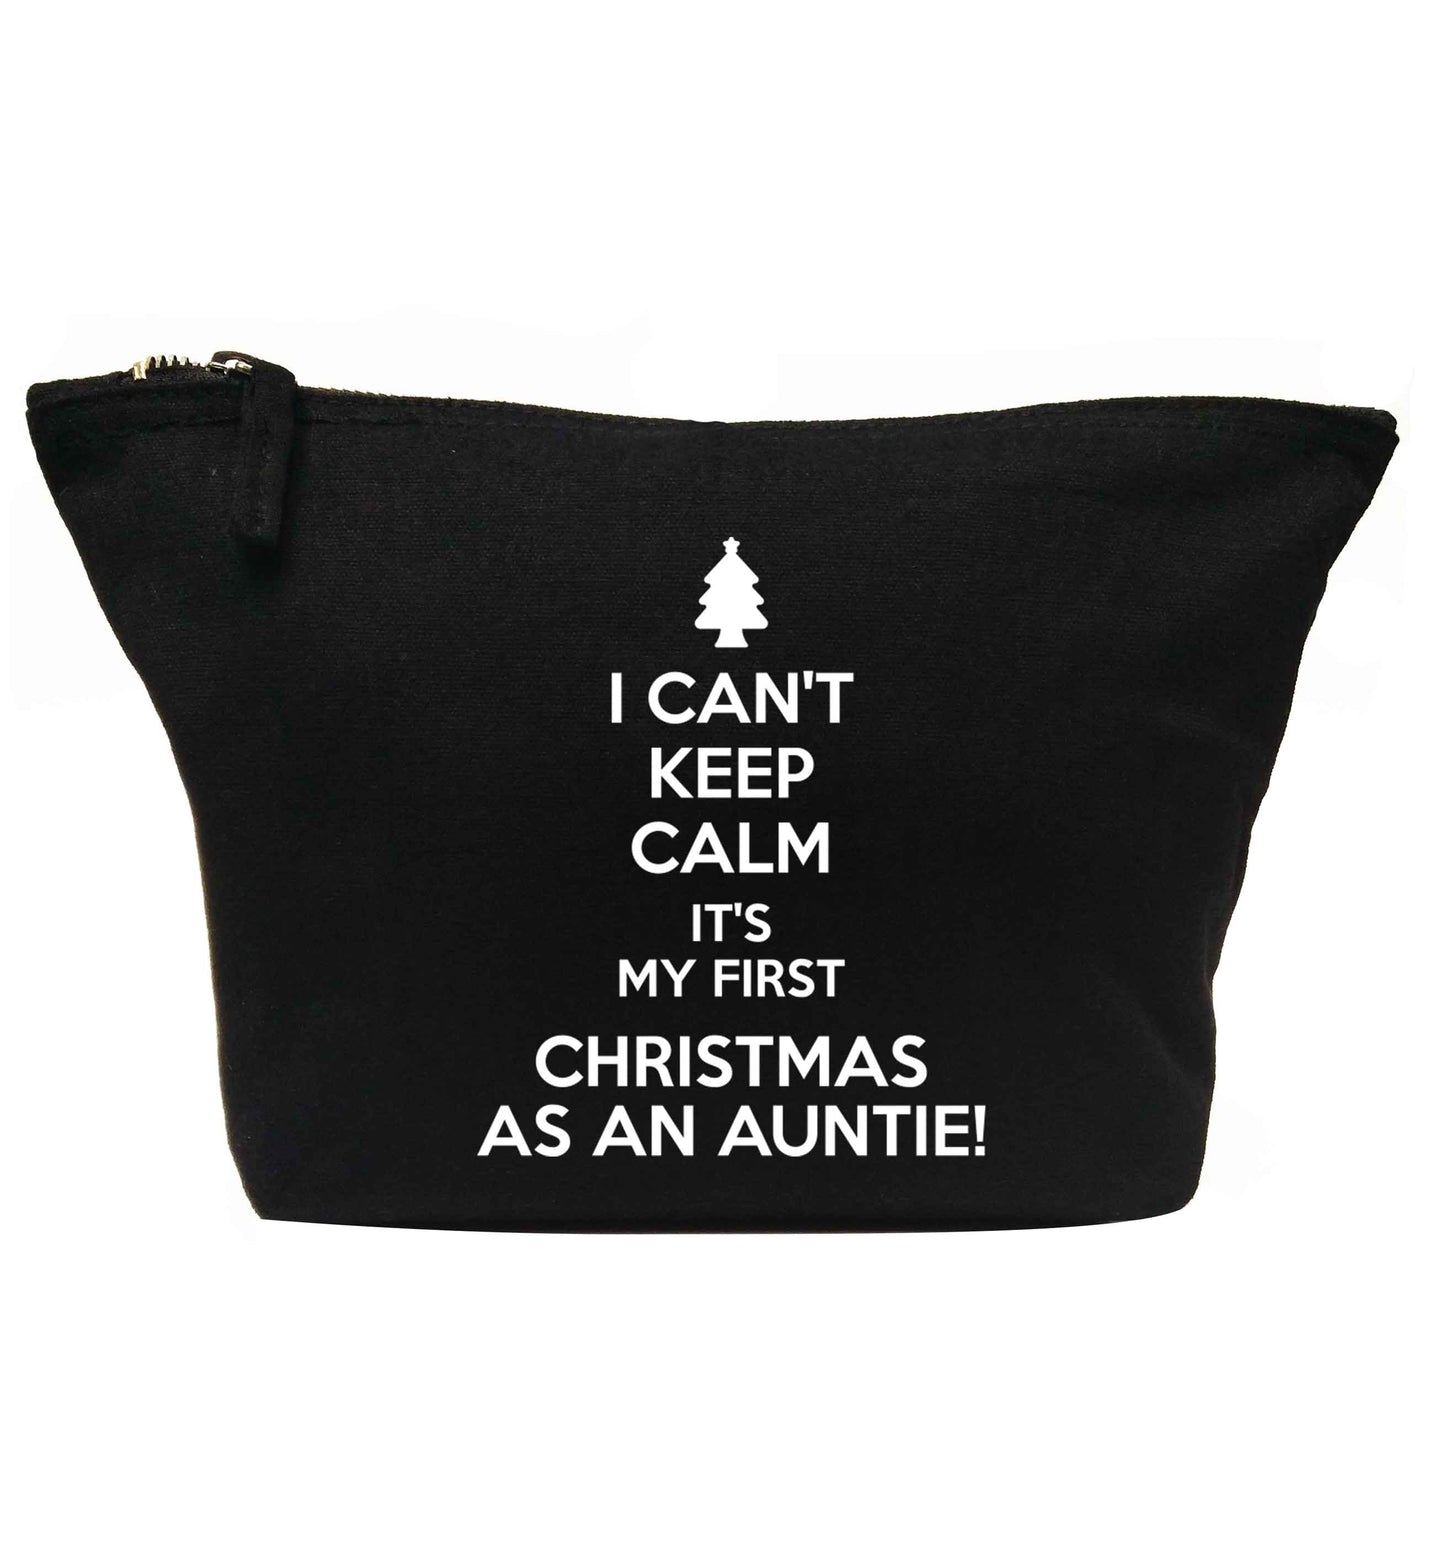 I can't keep calm it's my first Christmas as an auntie! | makeup / wash bag